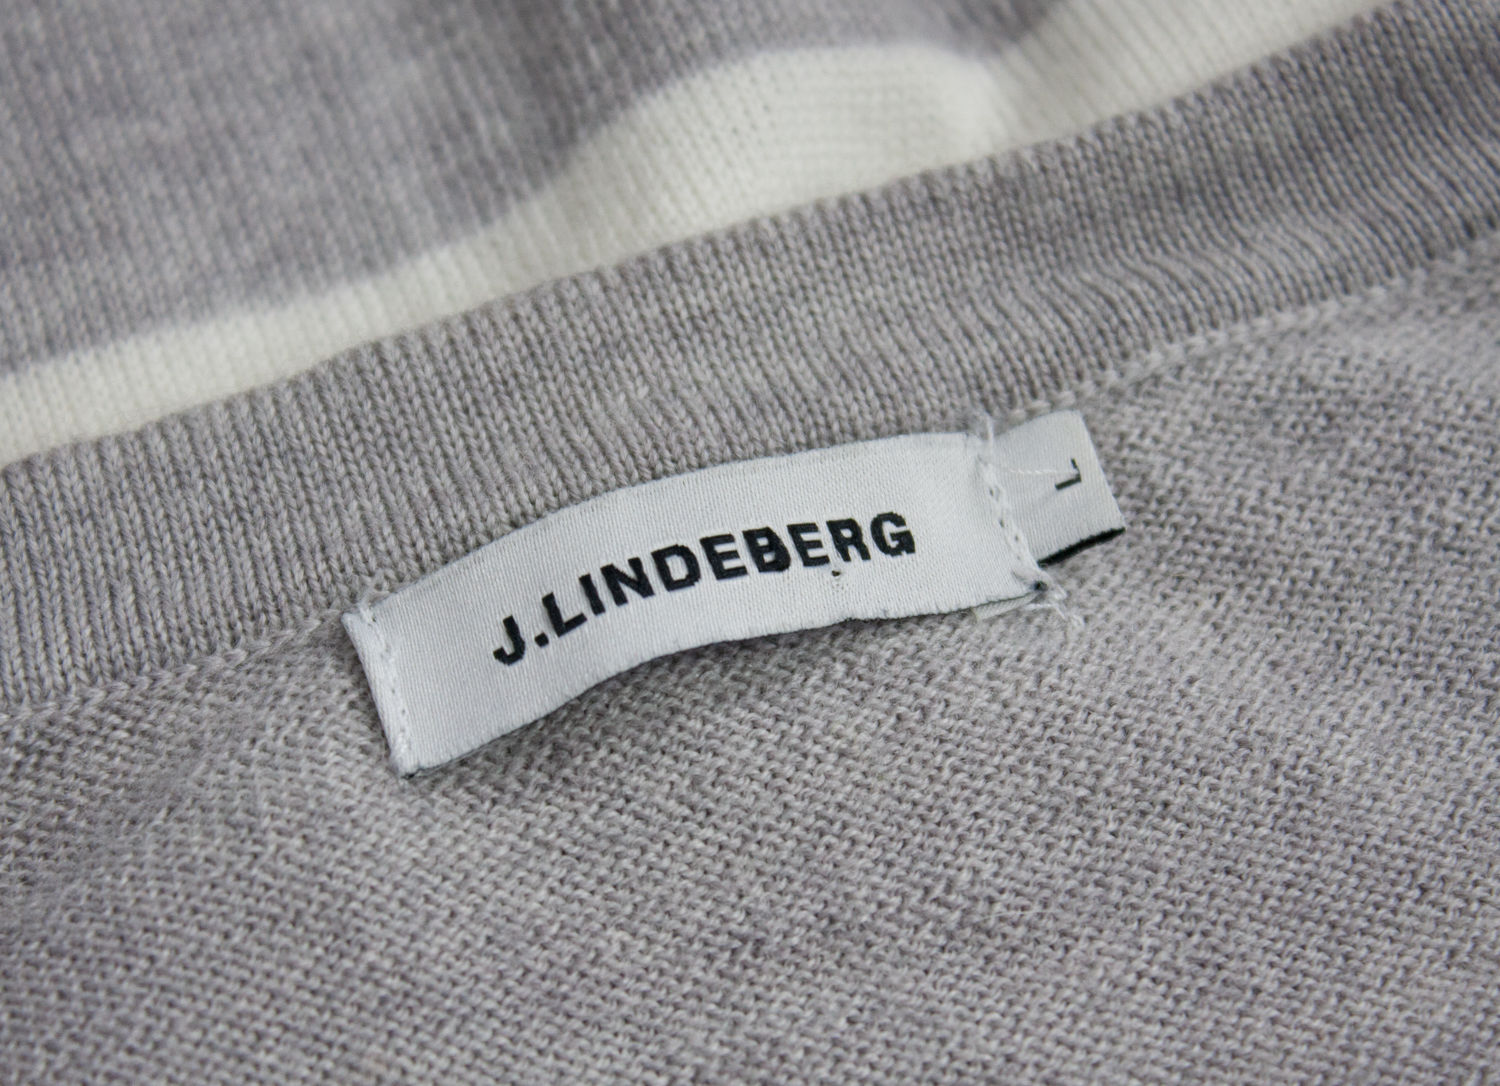 J. Lindeberg Men's Gray Thin Merino Wool Jumper Sweater, L - secondfirst